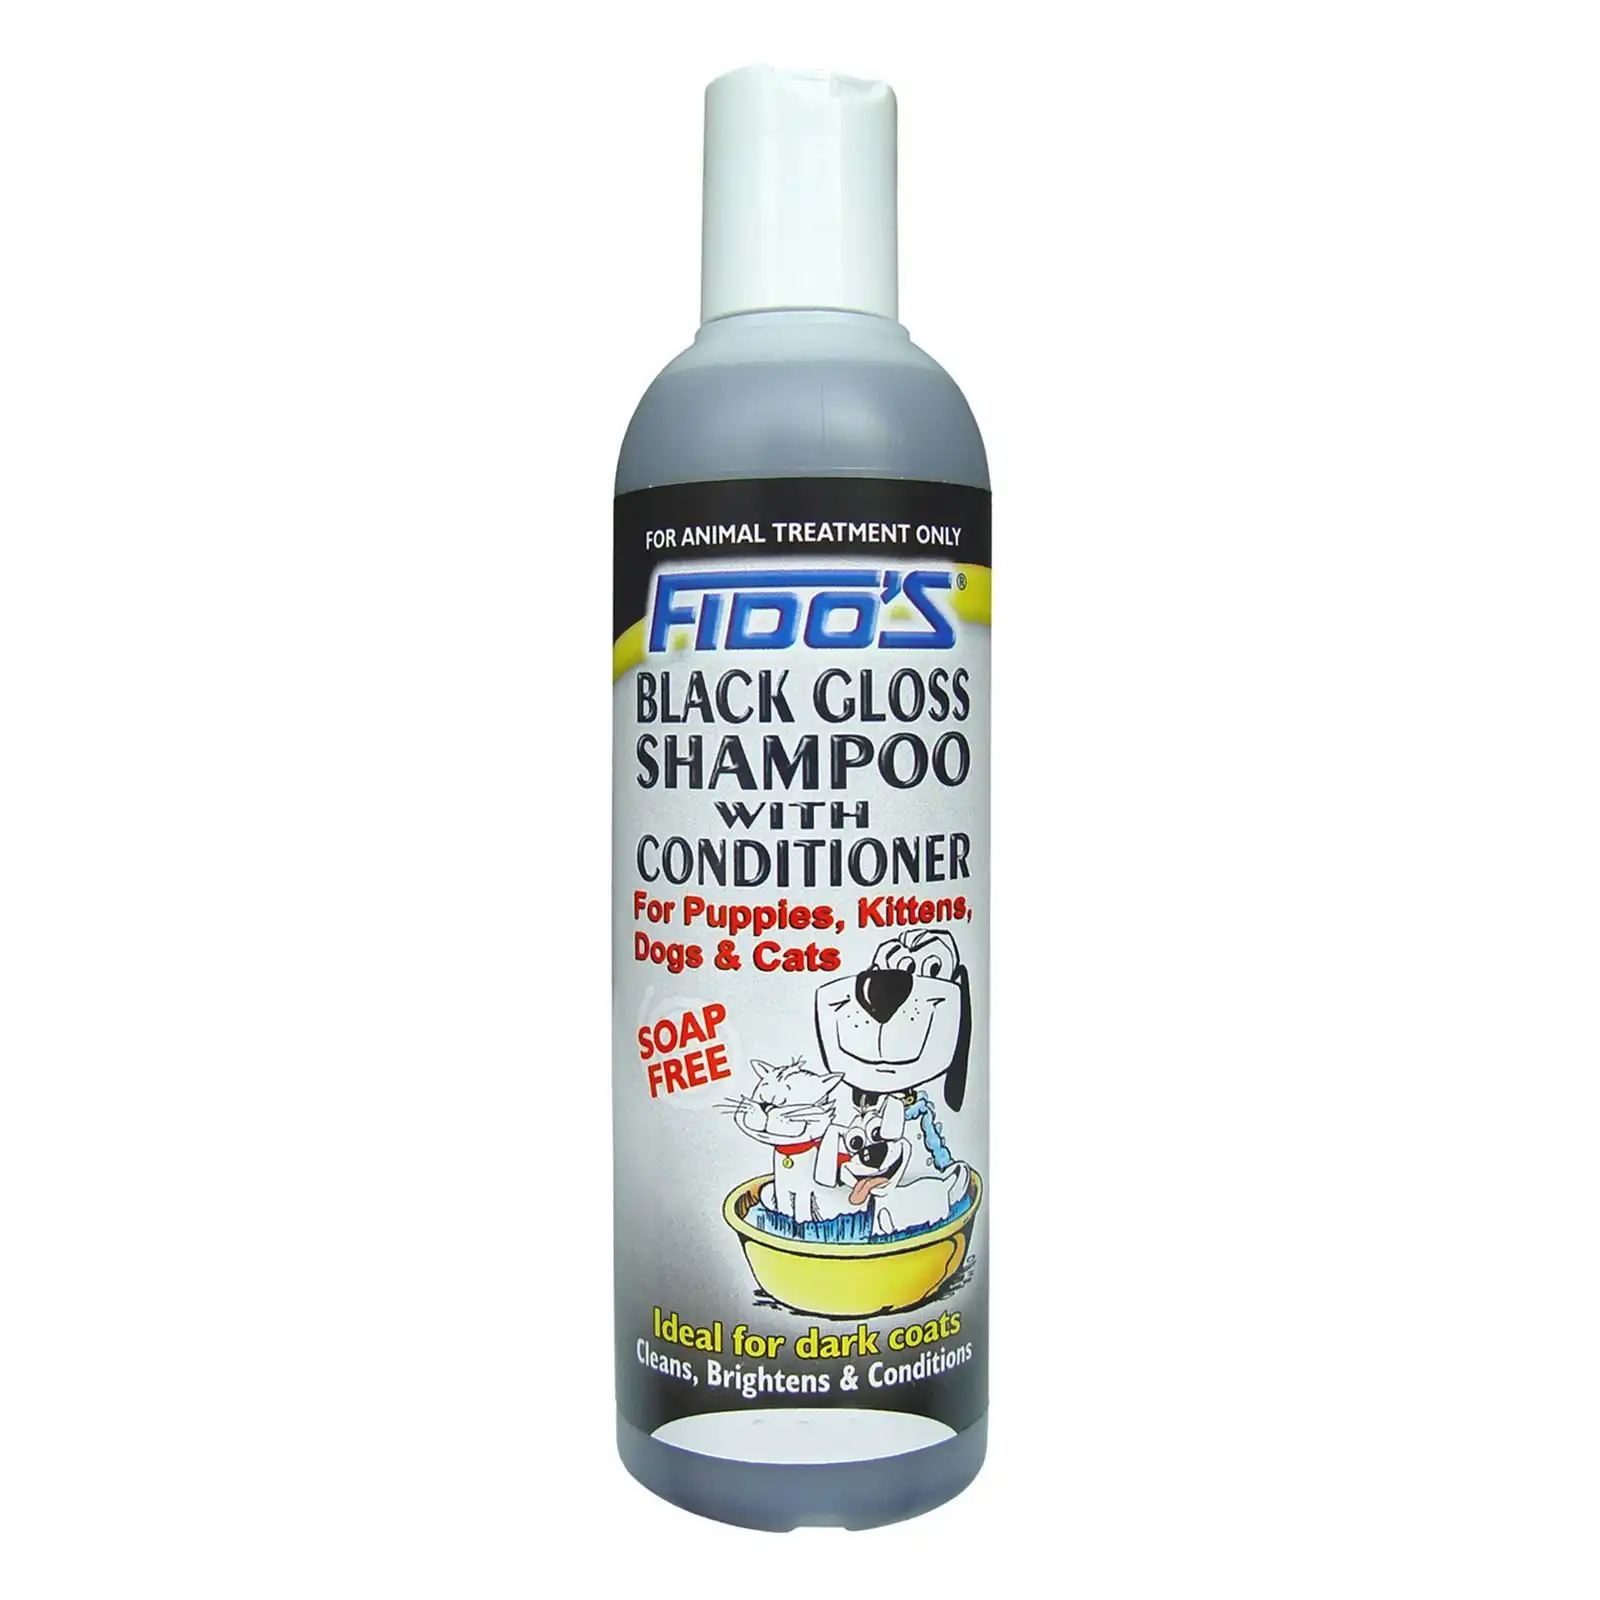 Fido's Black Gloss Shampoo with Conditioner For Dogs and Cats 250 mL